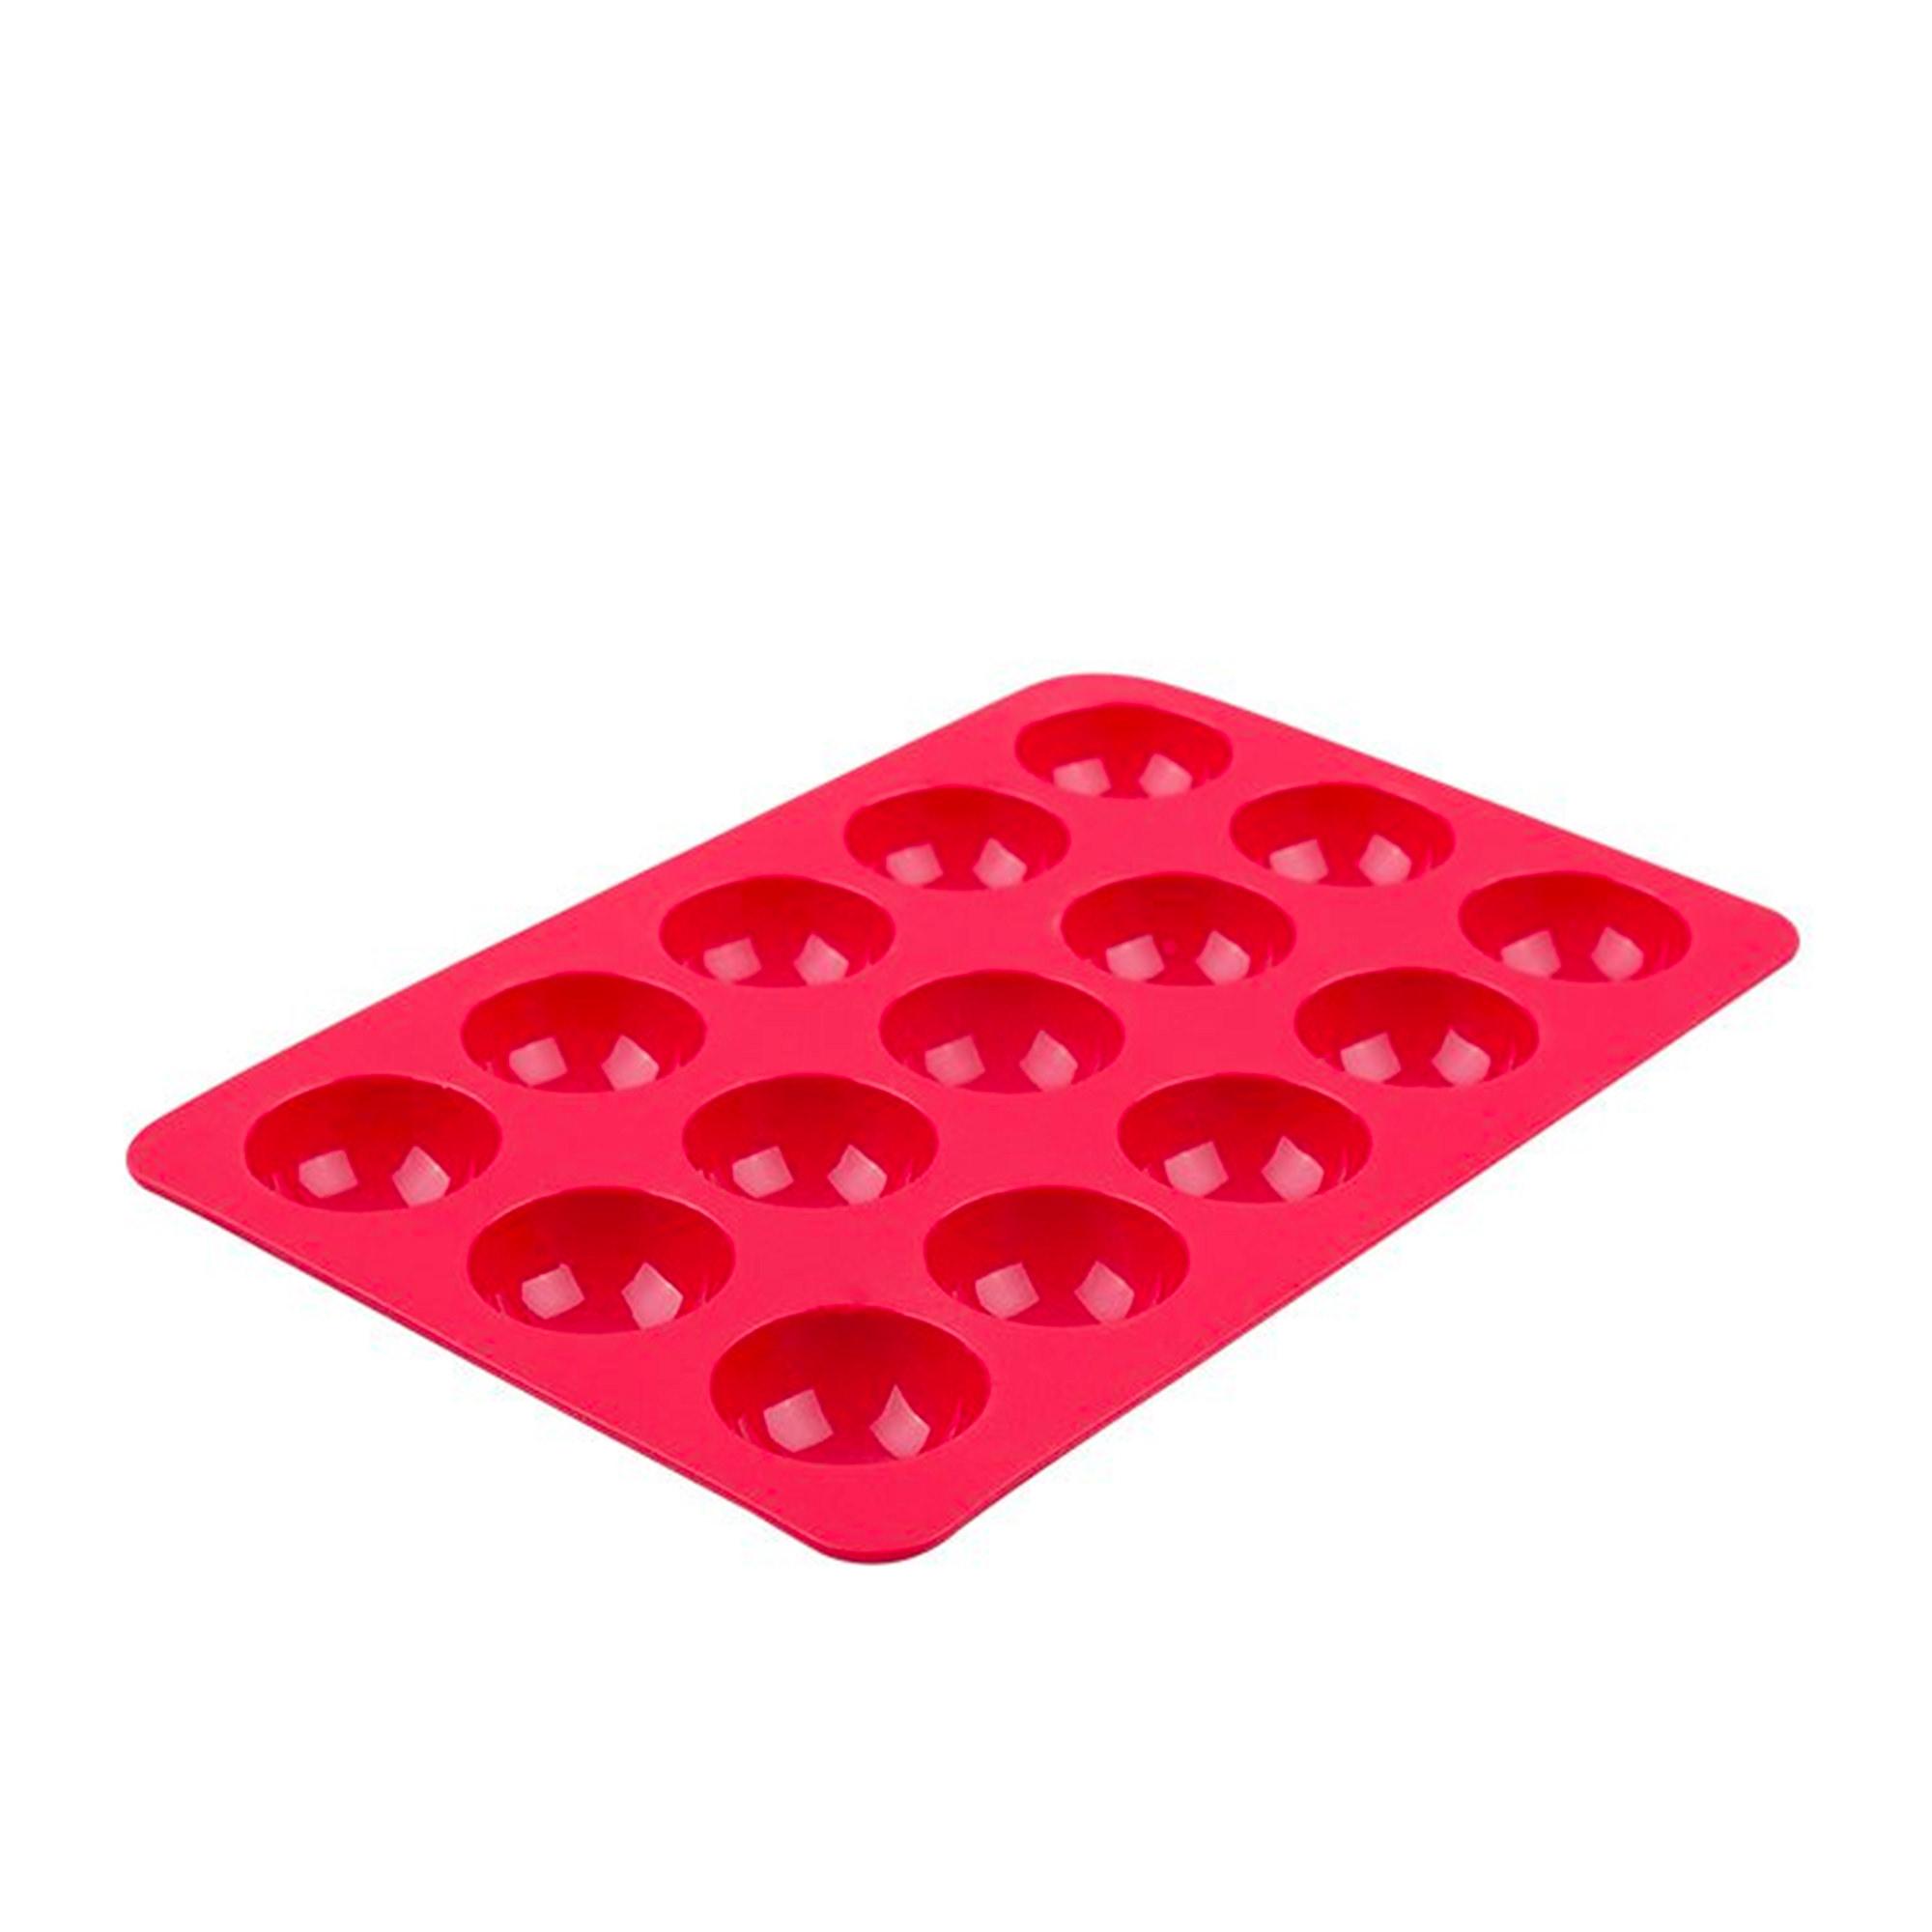 Daily Bake Small Dome Dessert Mould 15 Cup Red Image 1